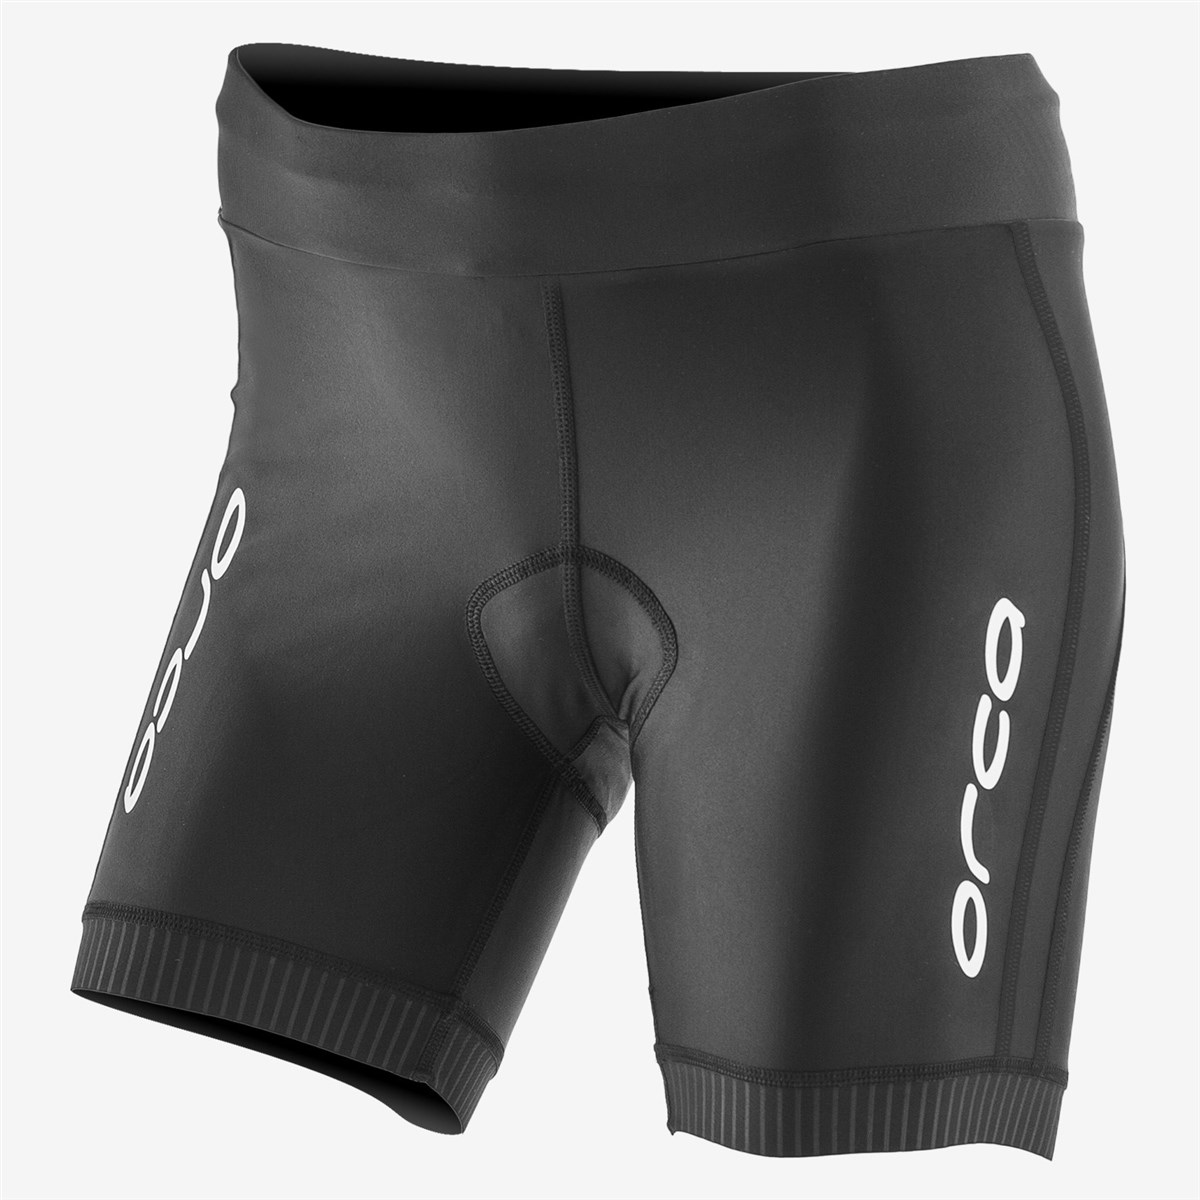 Orca Core Hipster Womens Triathlon Shorts product image